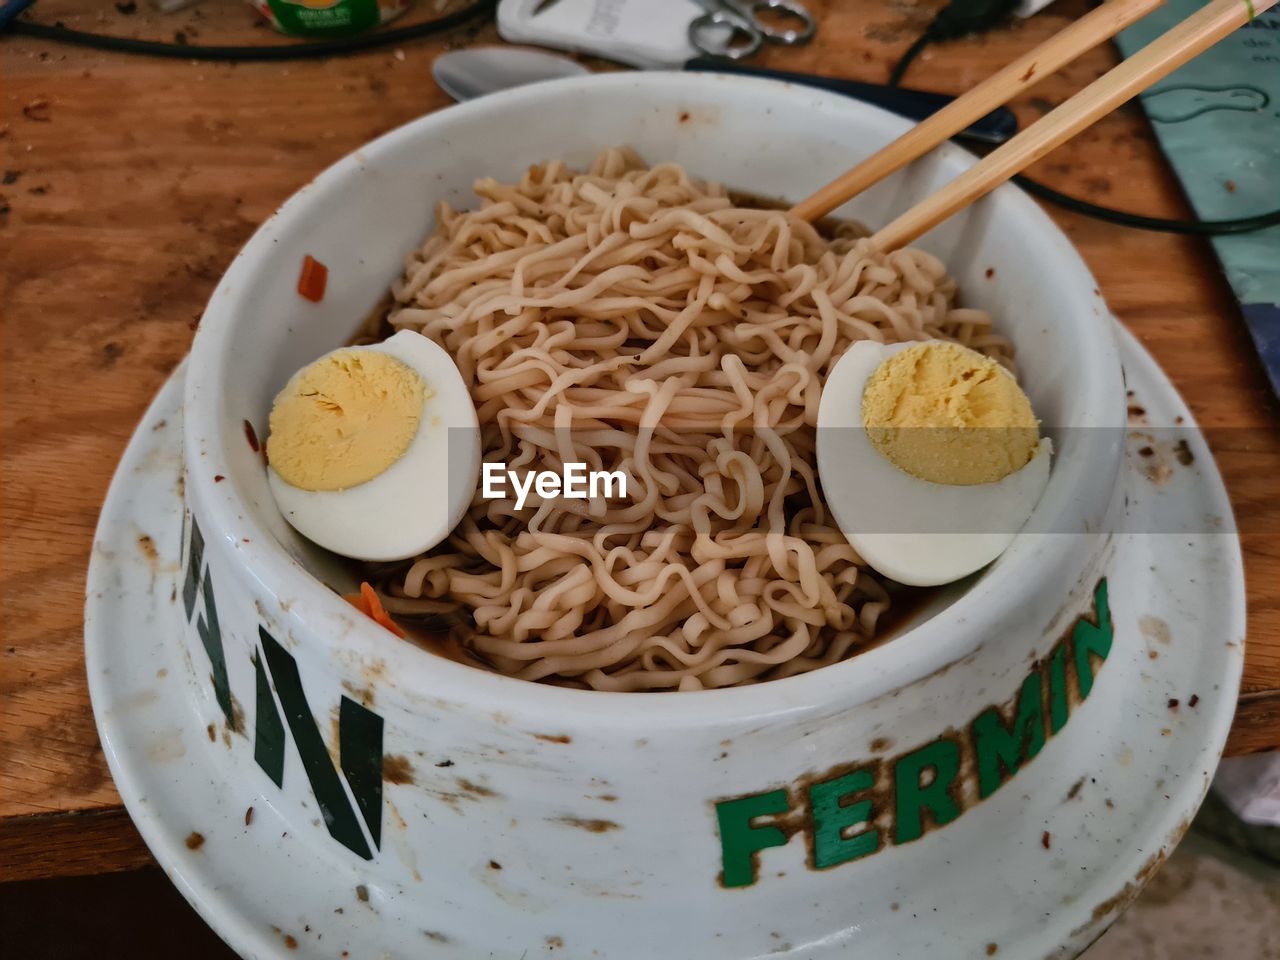 food and drink, food, dish, pasta, noodle, italian food, healthy eating, freshness, plate, meal, cuisine, wellbeing, table, asian food, high angle view, no people, indoors, bowl, wood, kitchen utensil, egg, eating utensil, crockery, still life, serving size, chopsticks, close-up